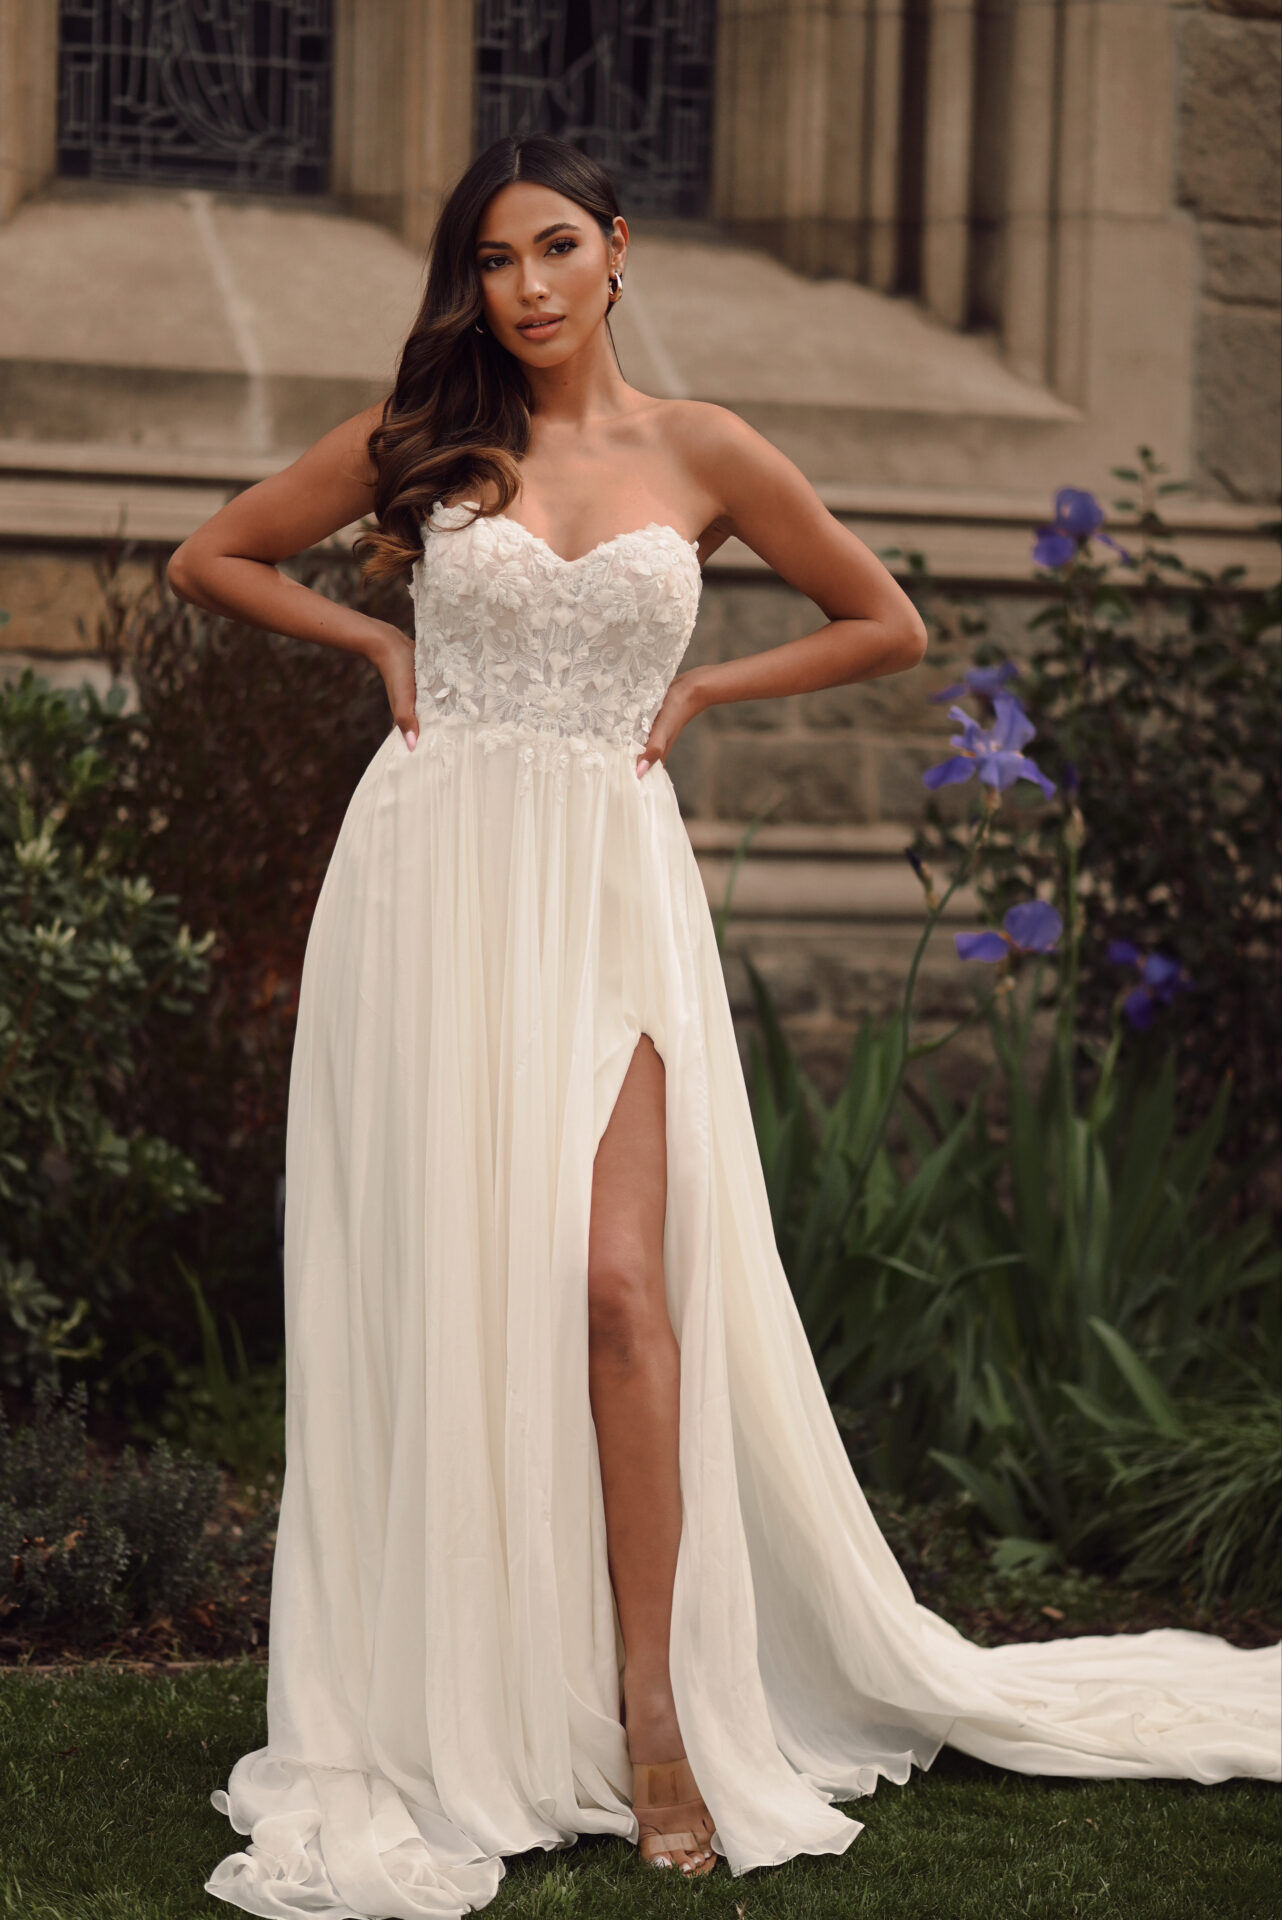 A-line wedding dress with beaded bustier top